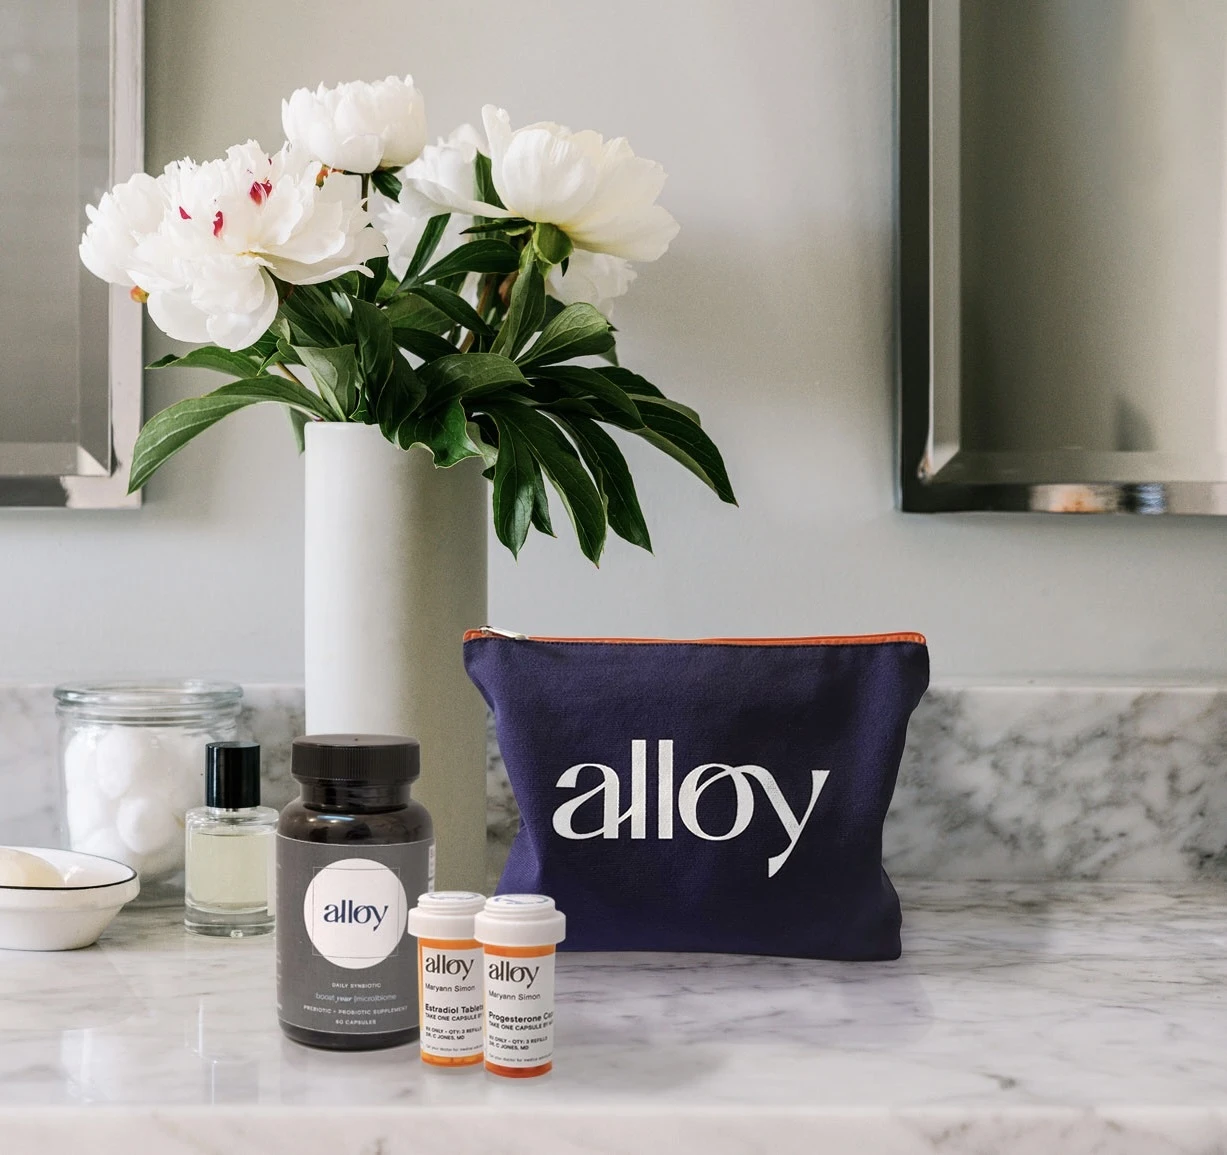 Alloy products on a marble counter next to a vase of white flowers